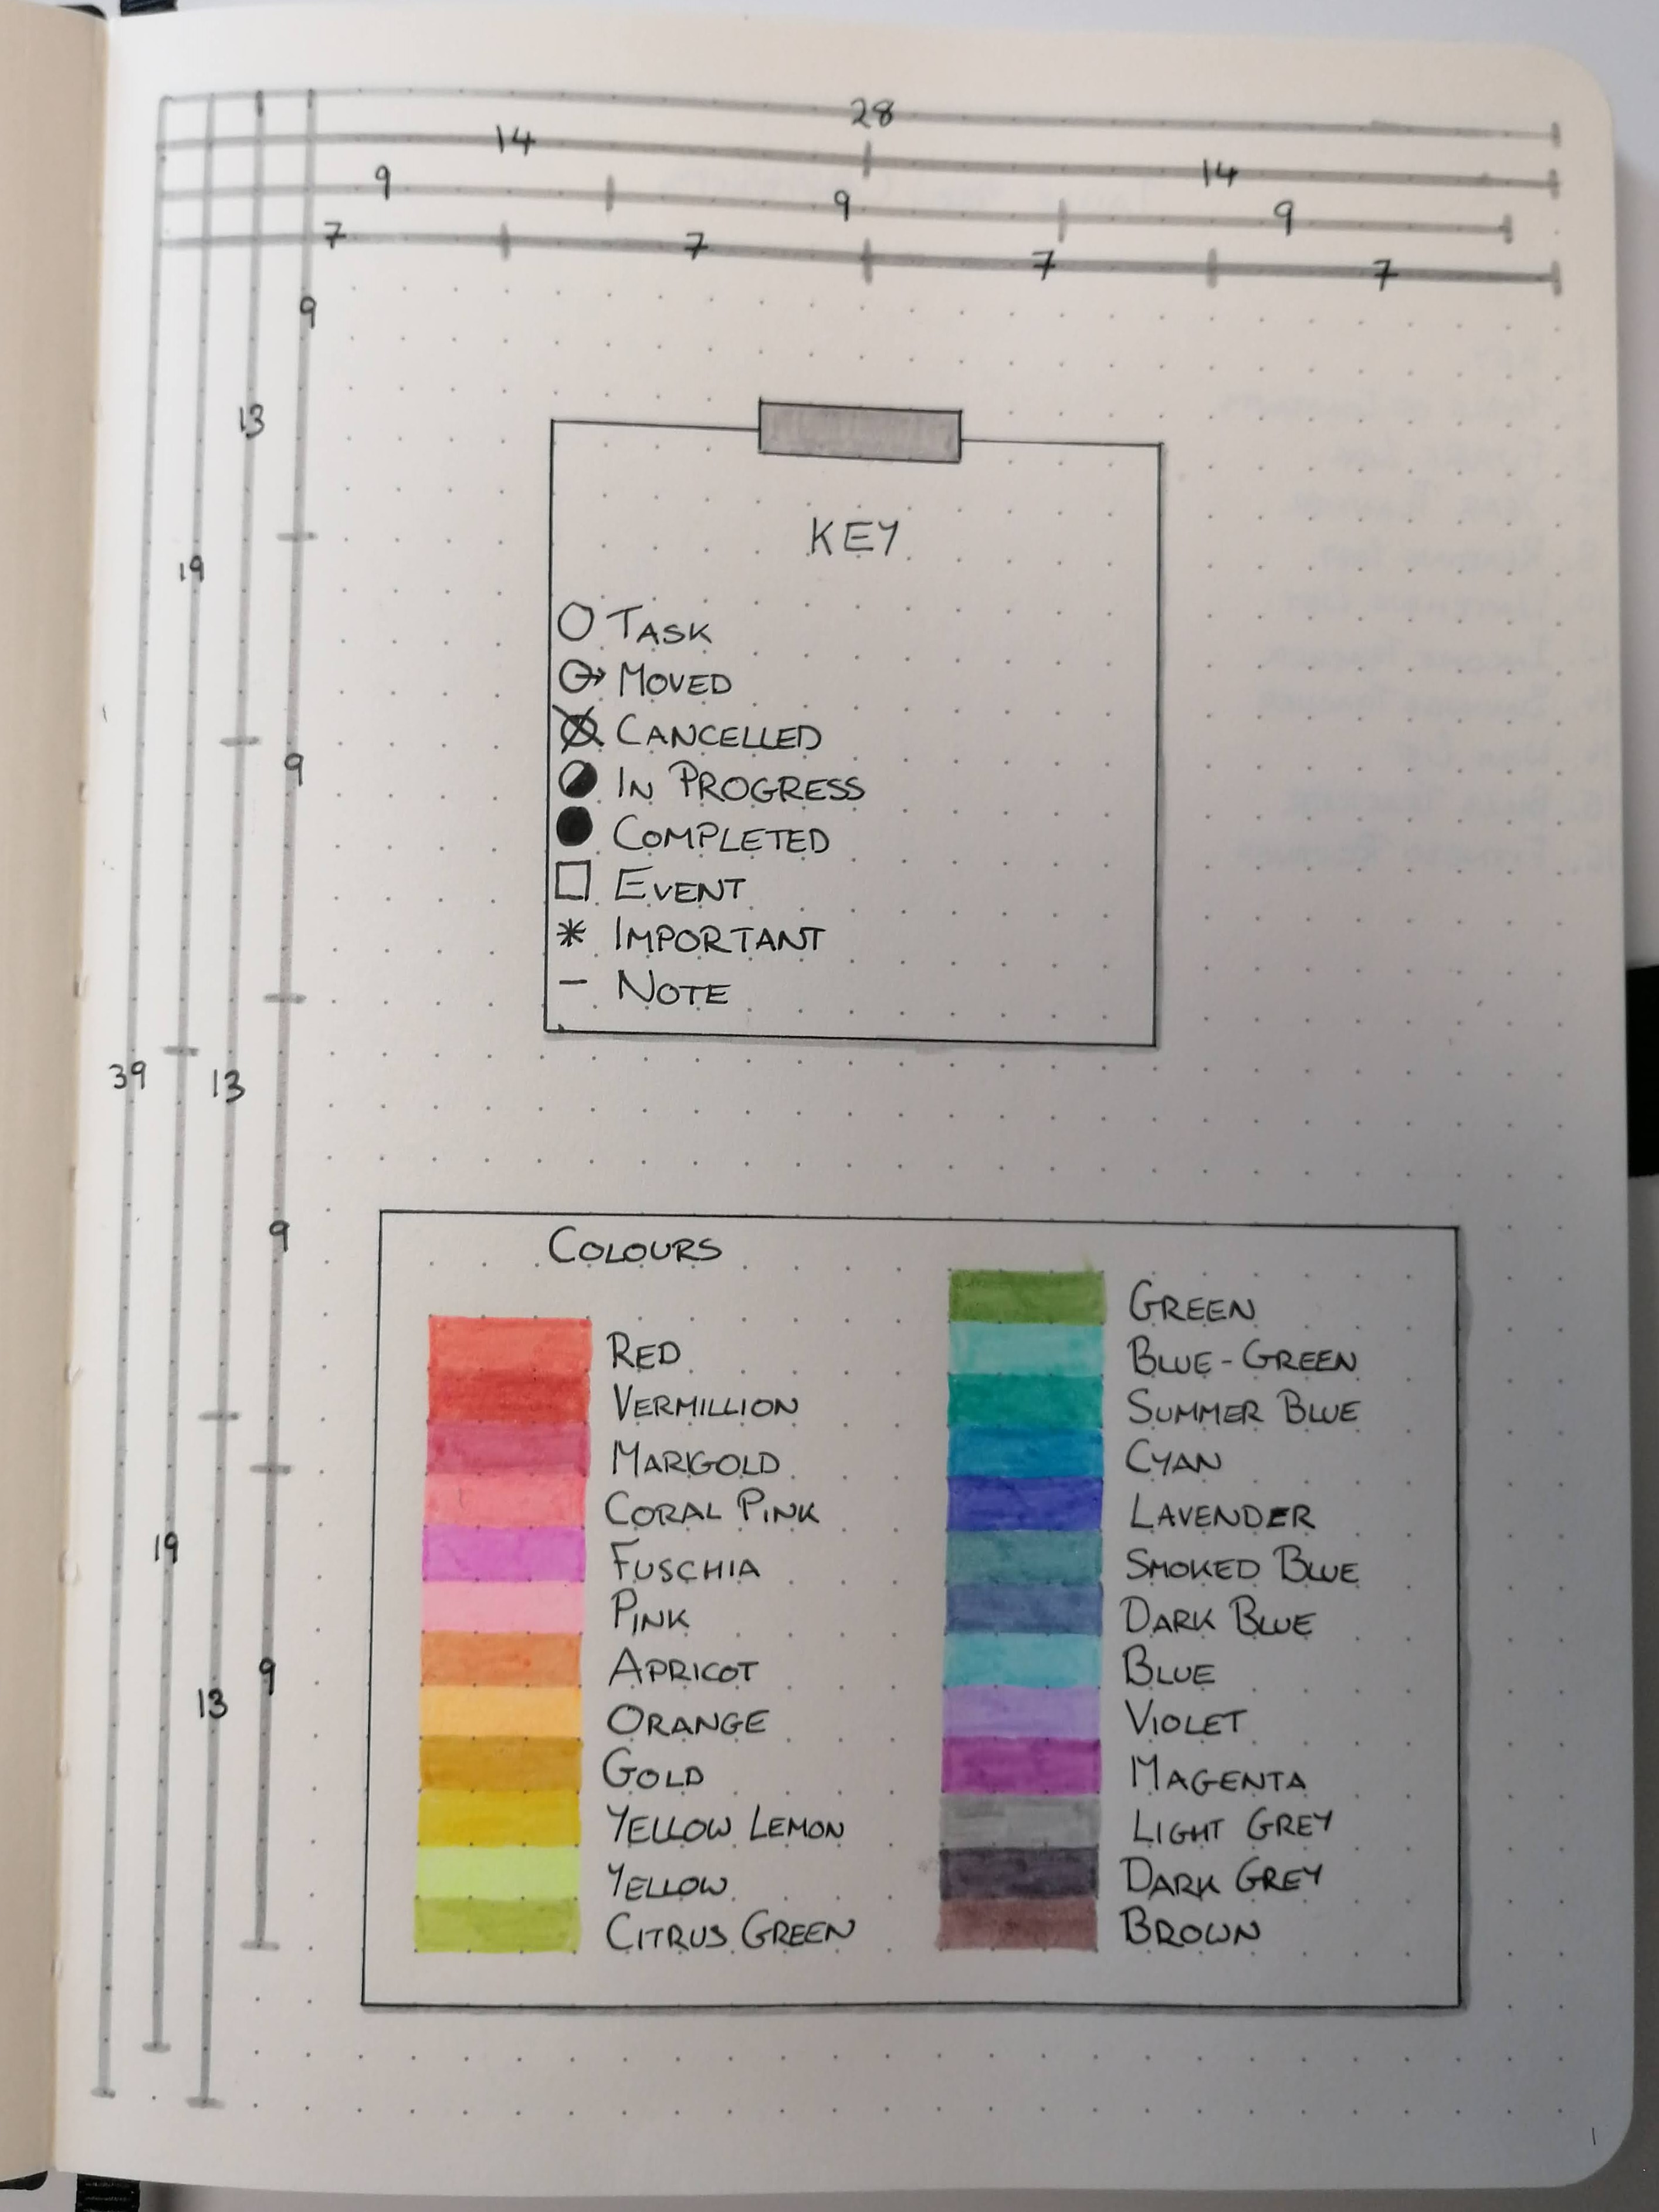 Key and Colour Guide